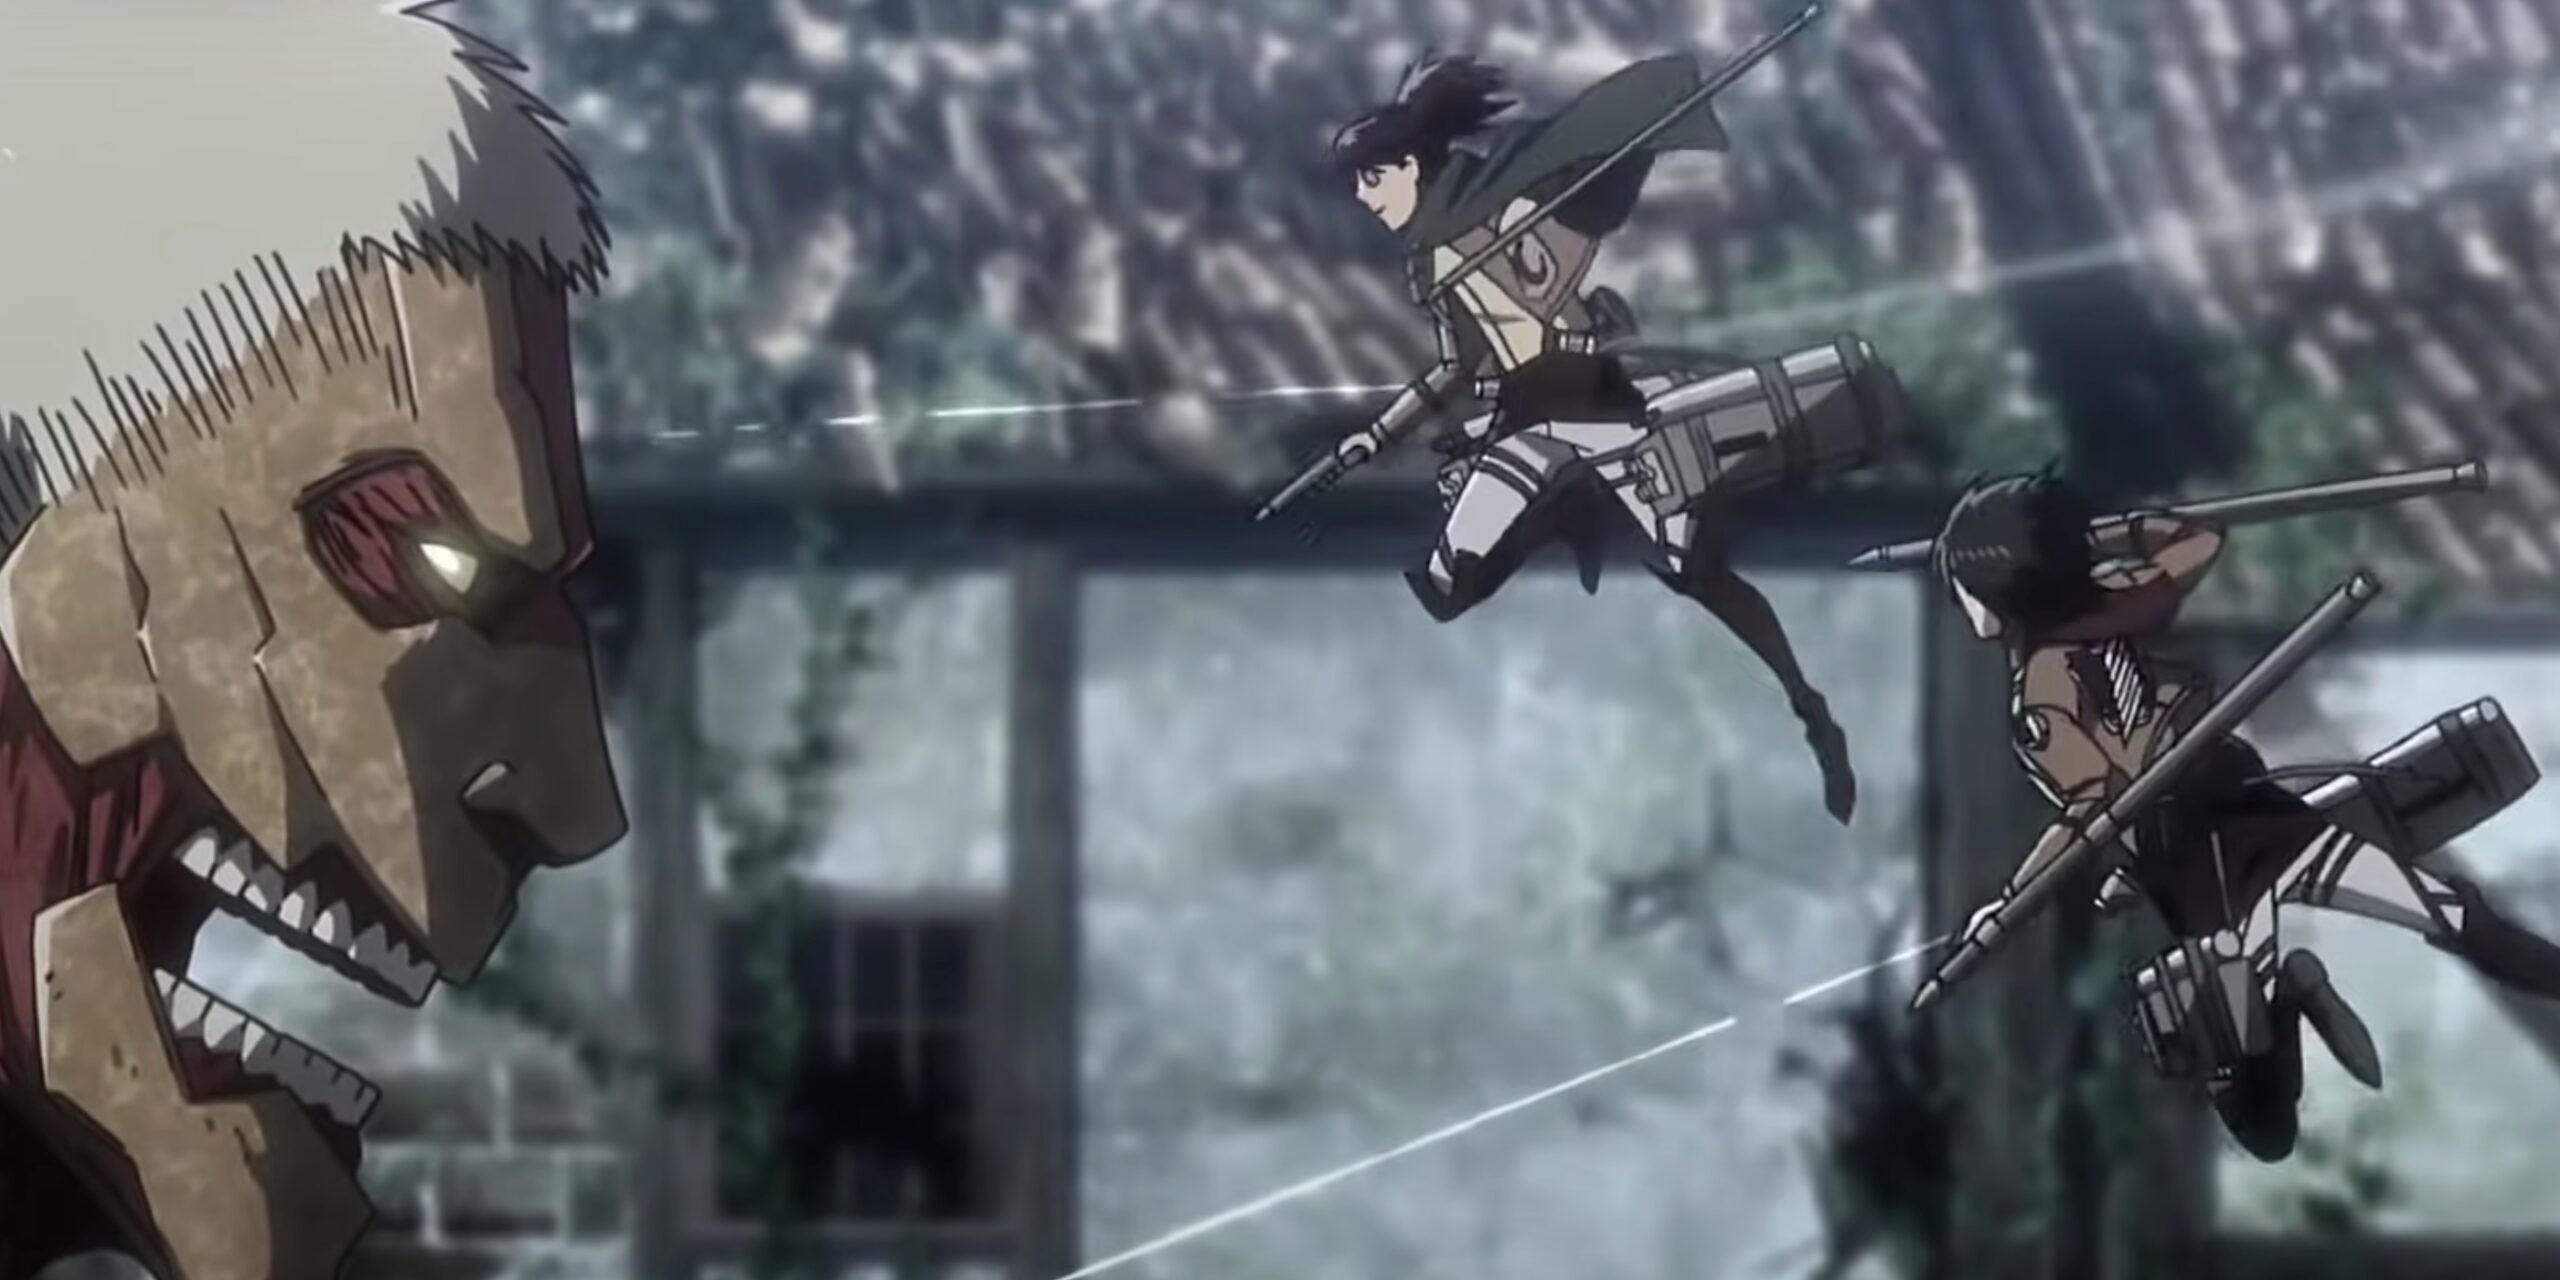 How Does ODM Gear Function In Attack on Titan?